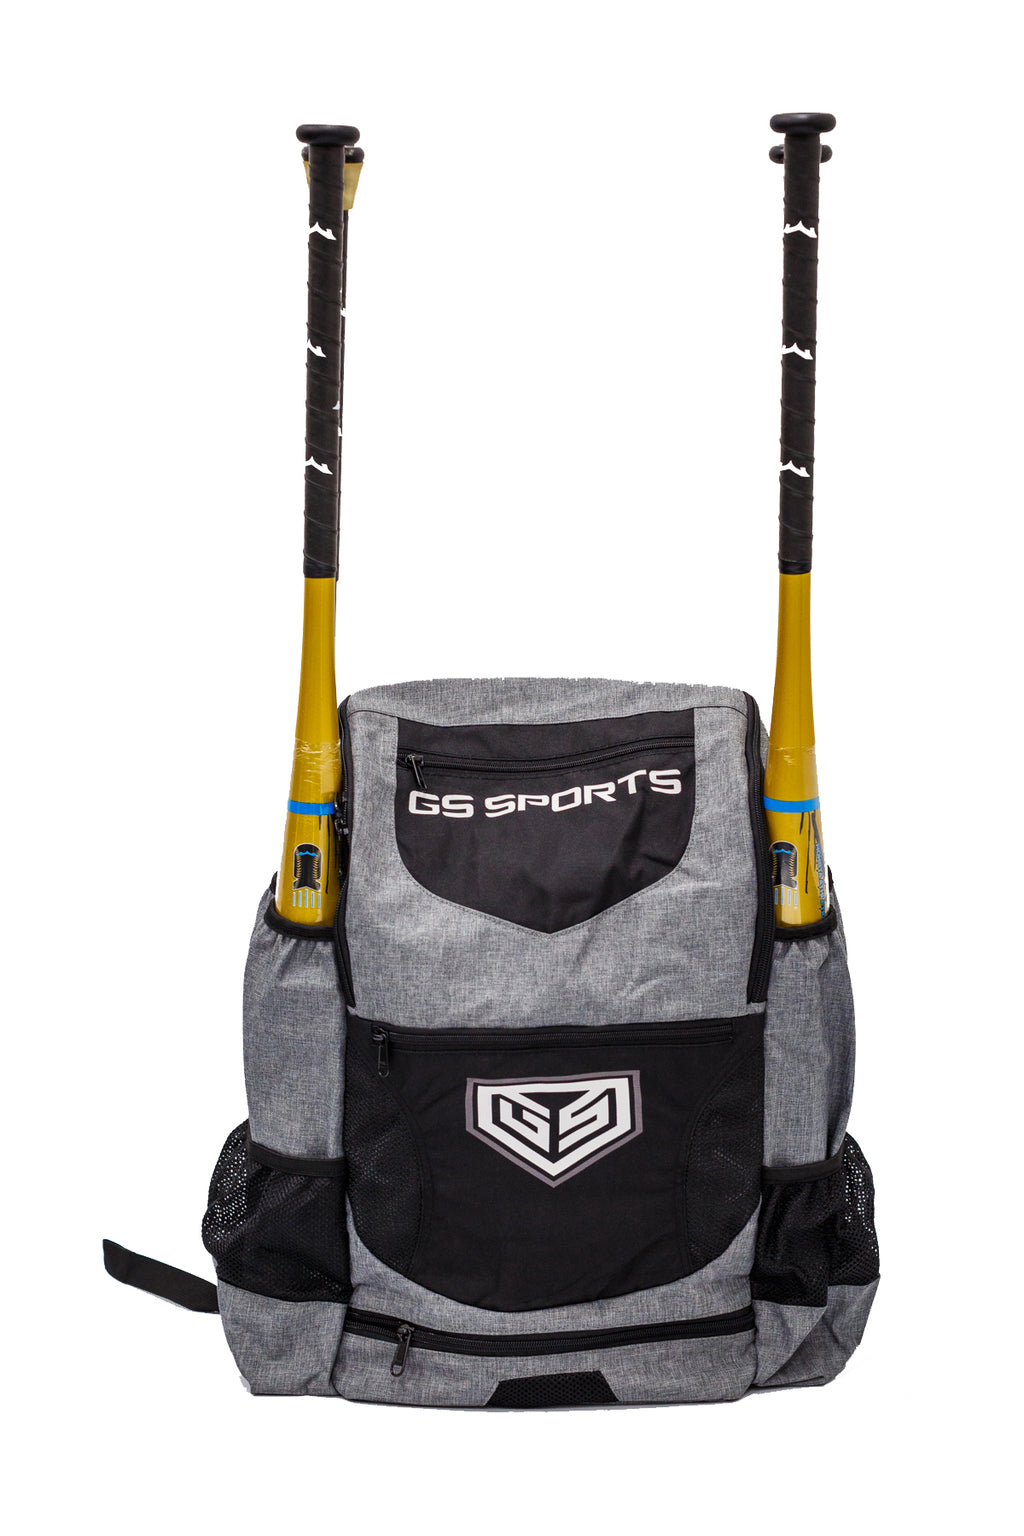 GS Sports Apex Backpack - Heather Grey